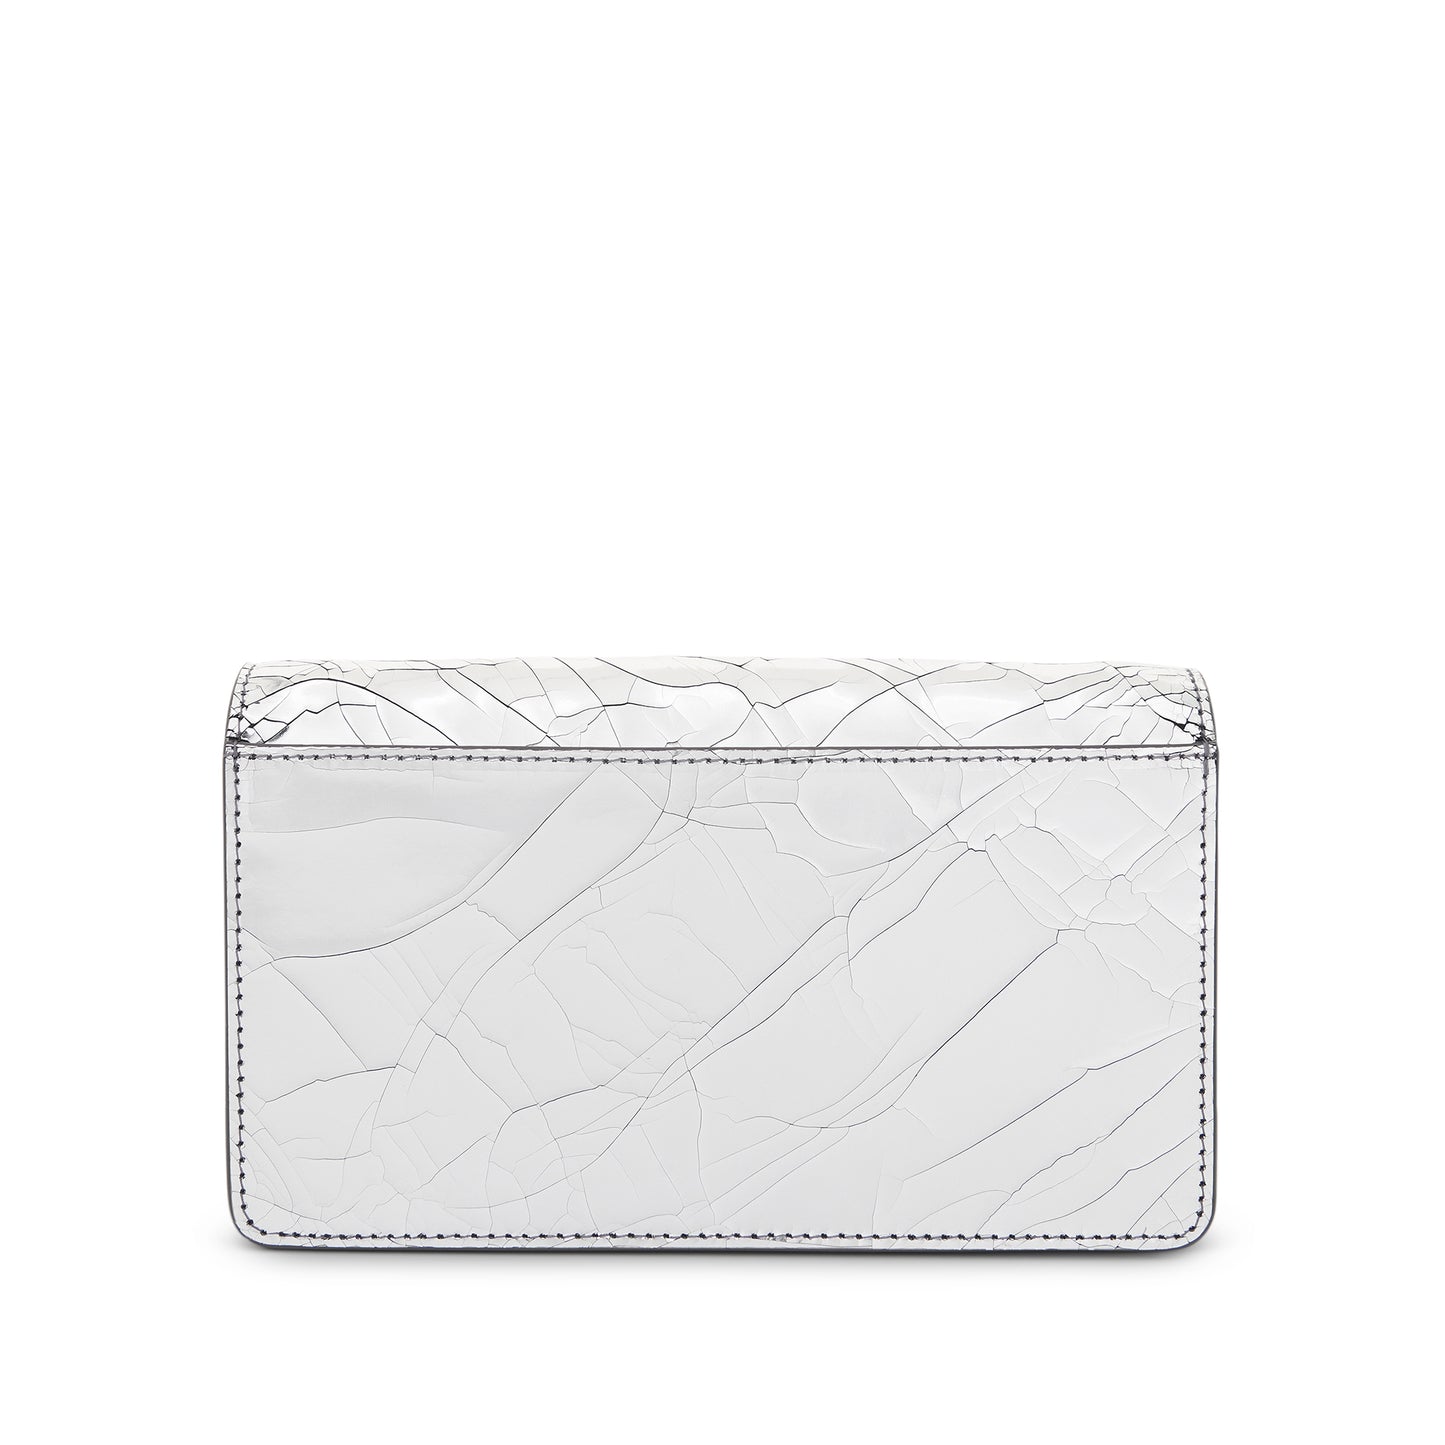 Four Stitches Wallet in Silver/Grey